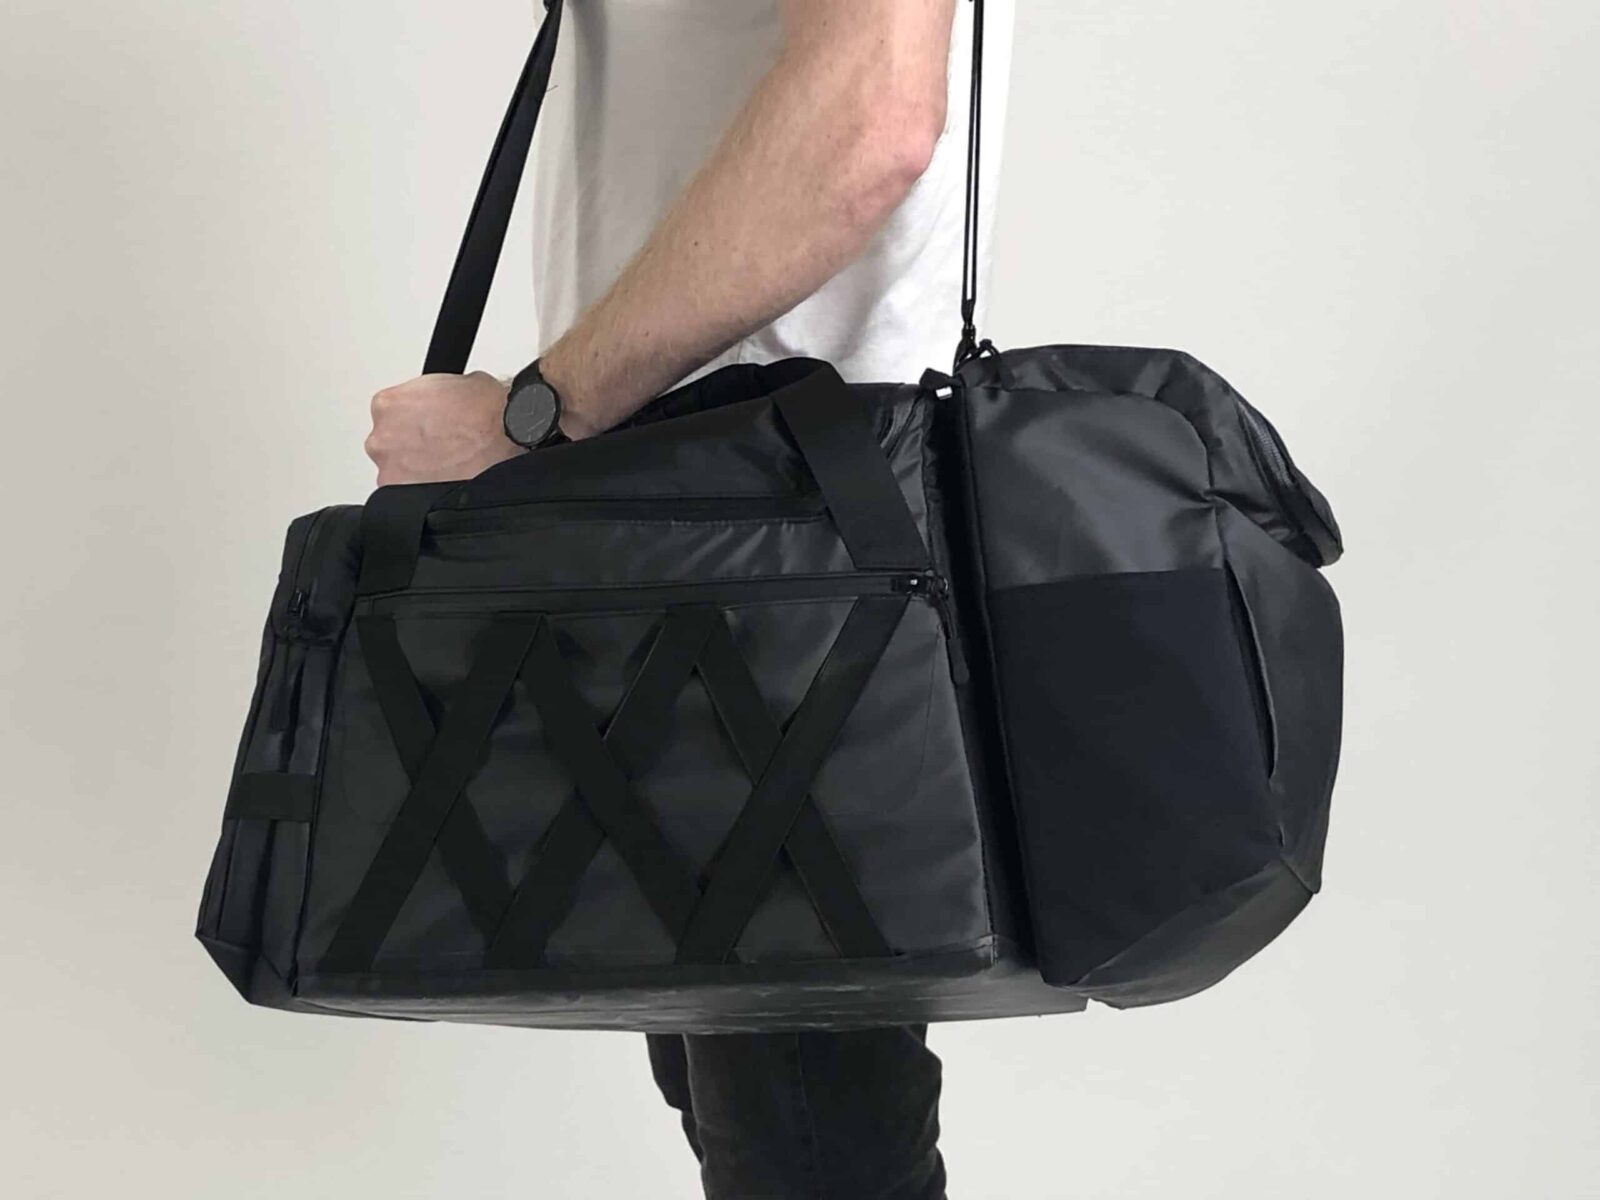 Mark 1 Prototyping of a black travel bag